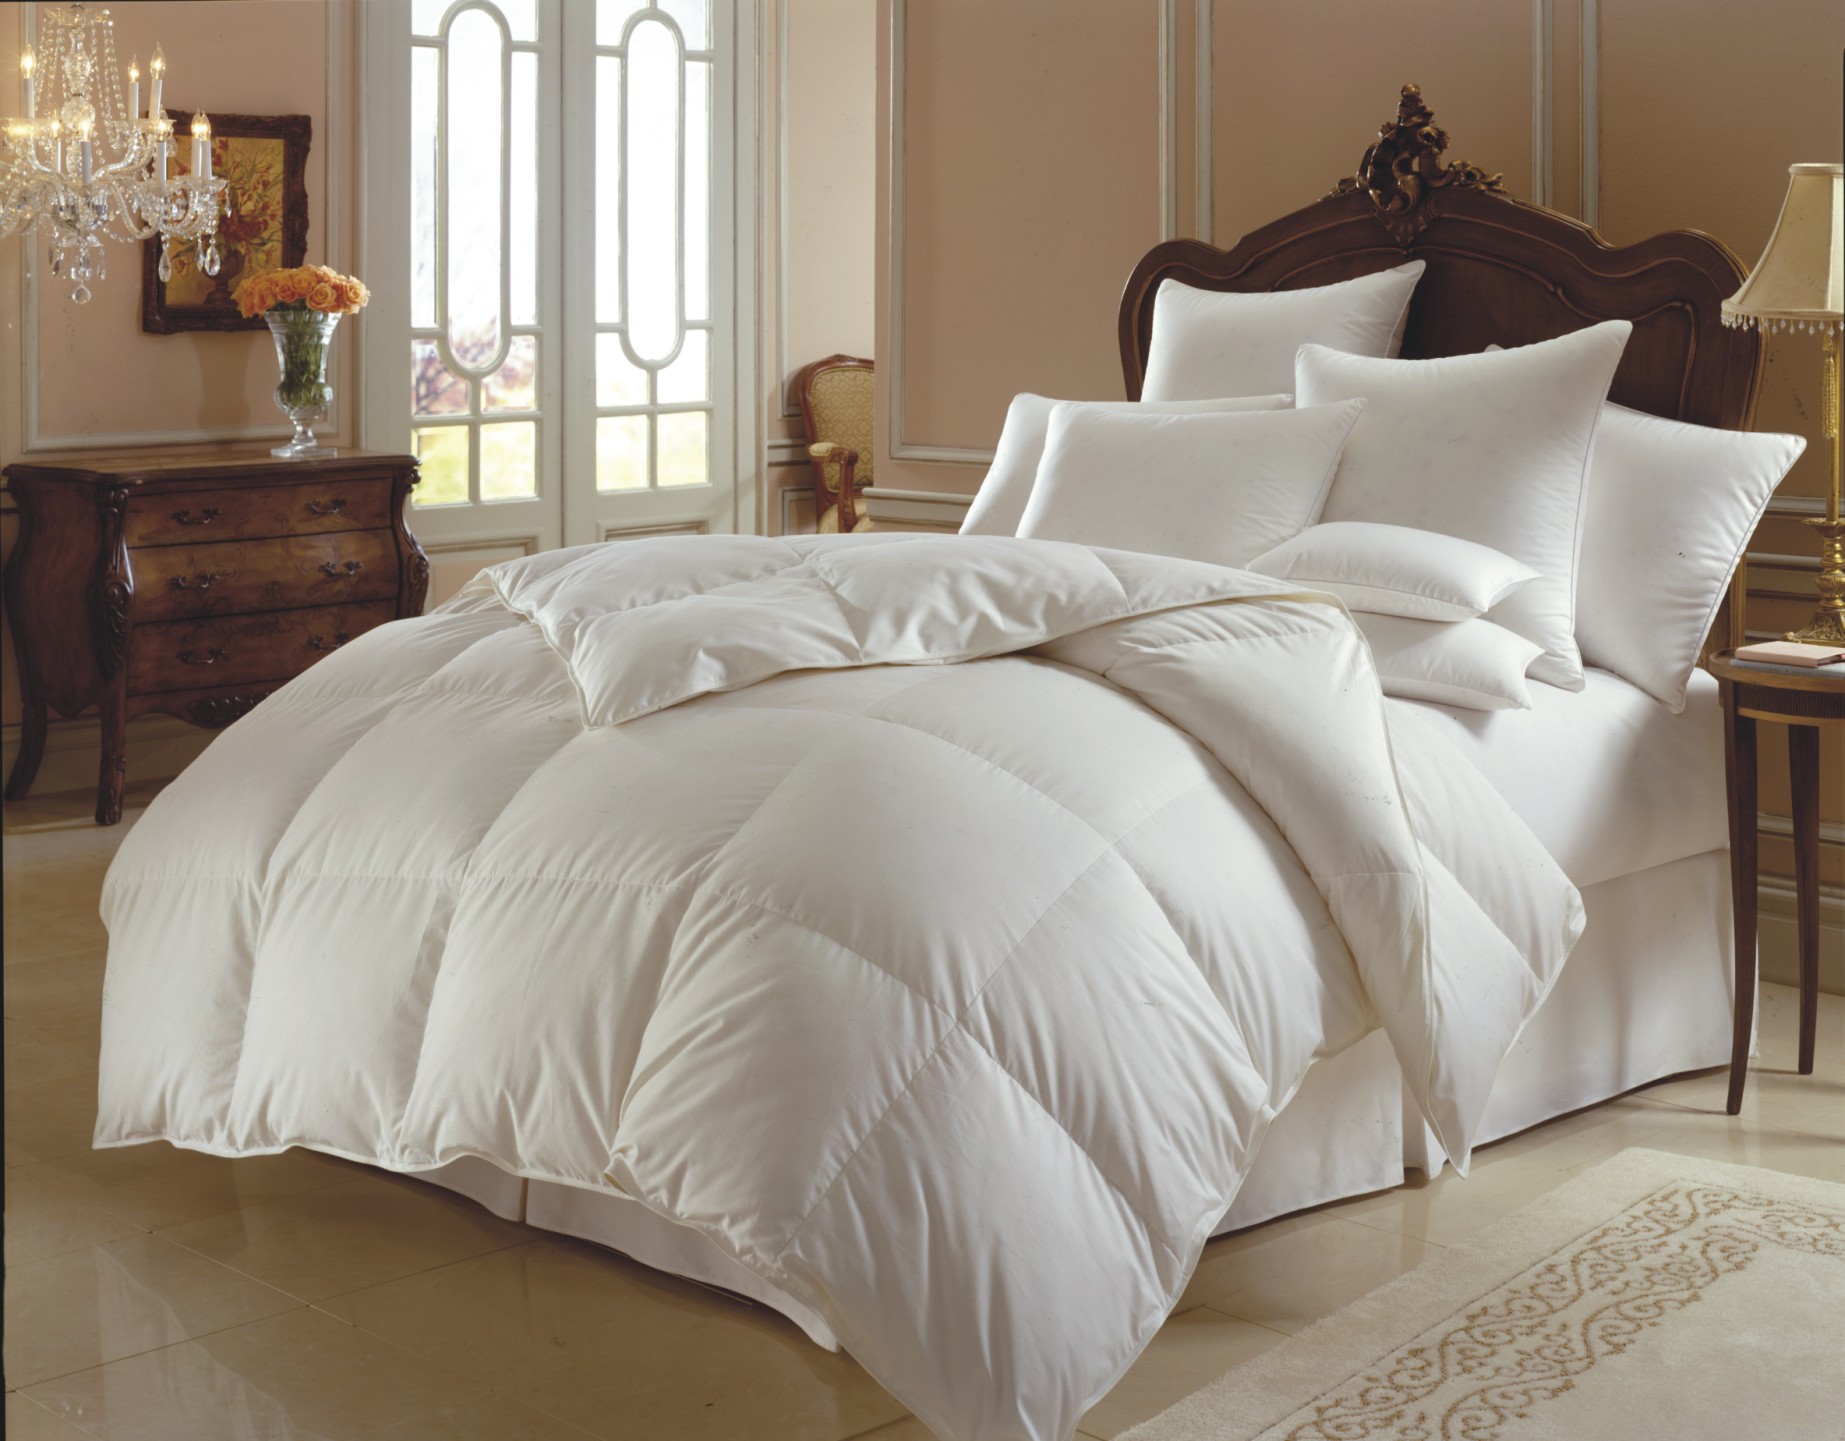 comforters you can wrap around mattress